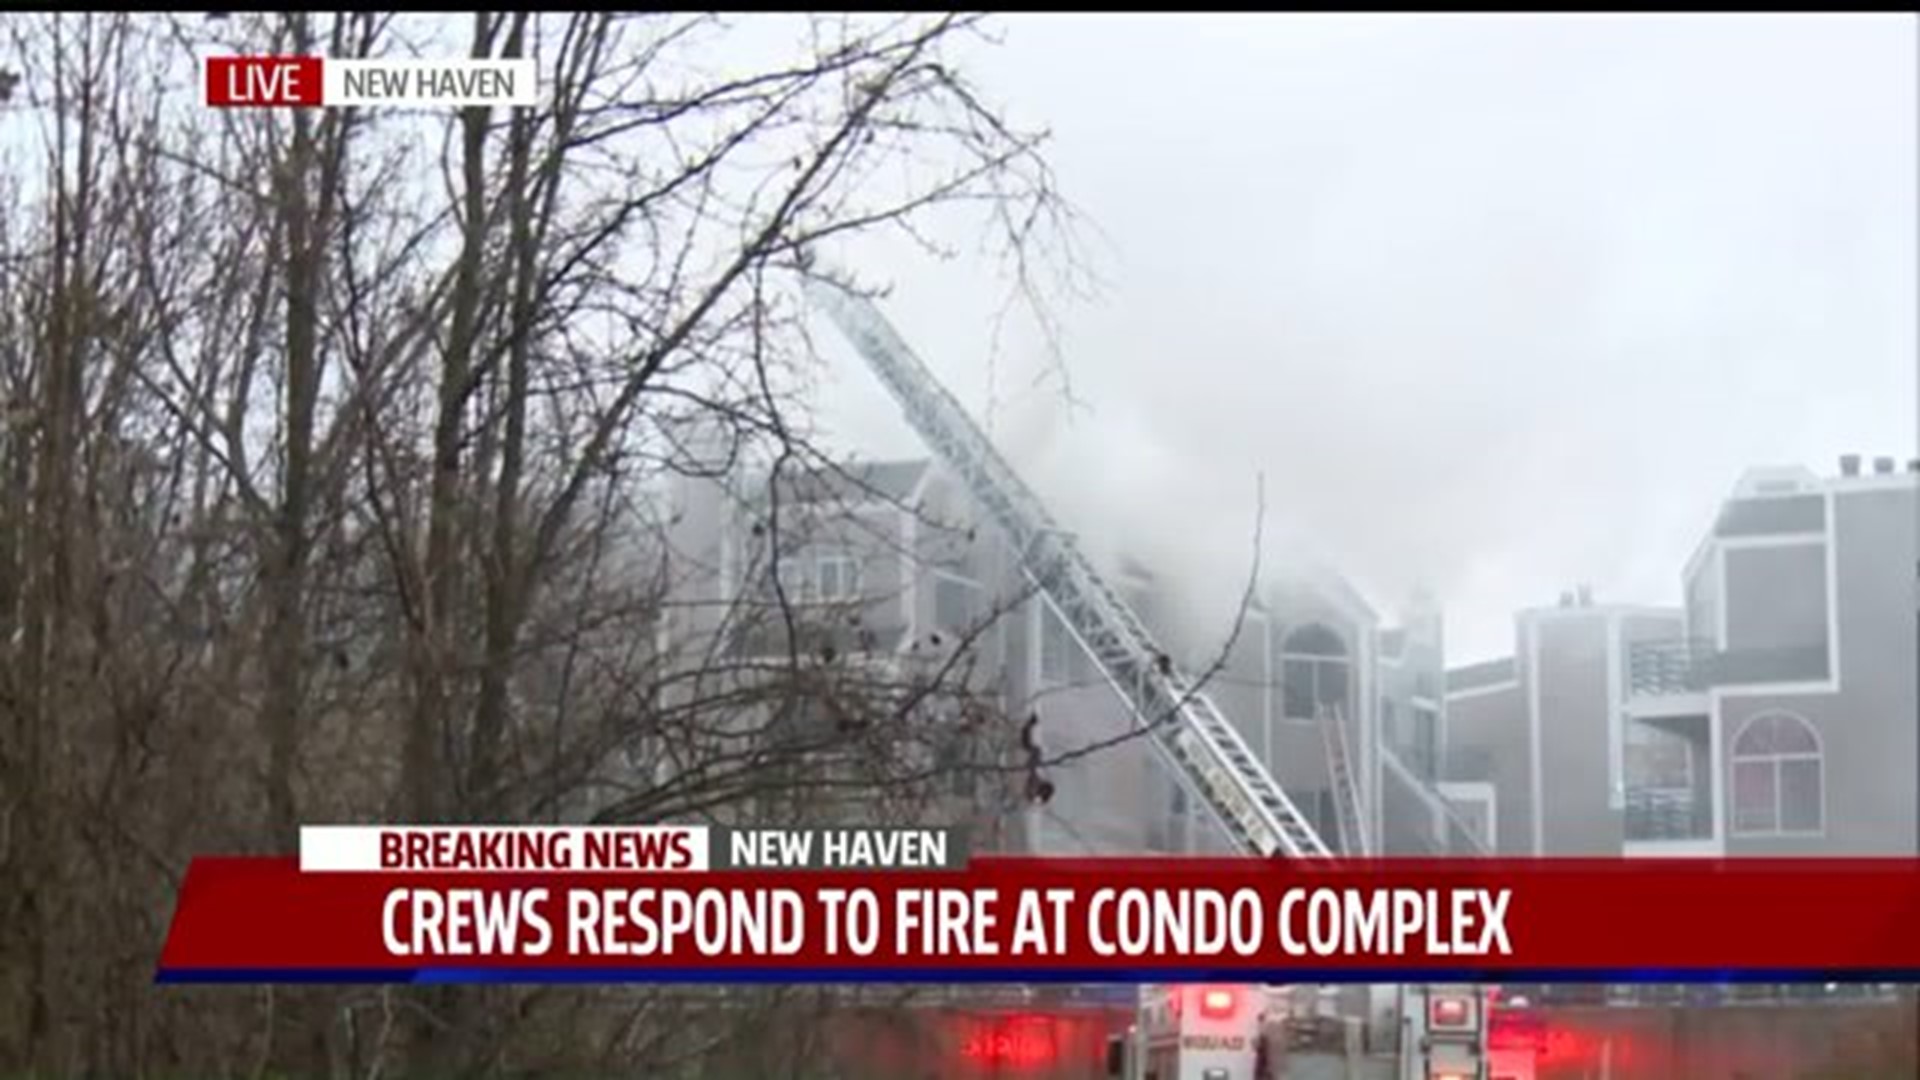 Firefighters battle blaze at New Haven condo complex